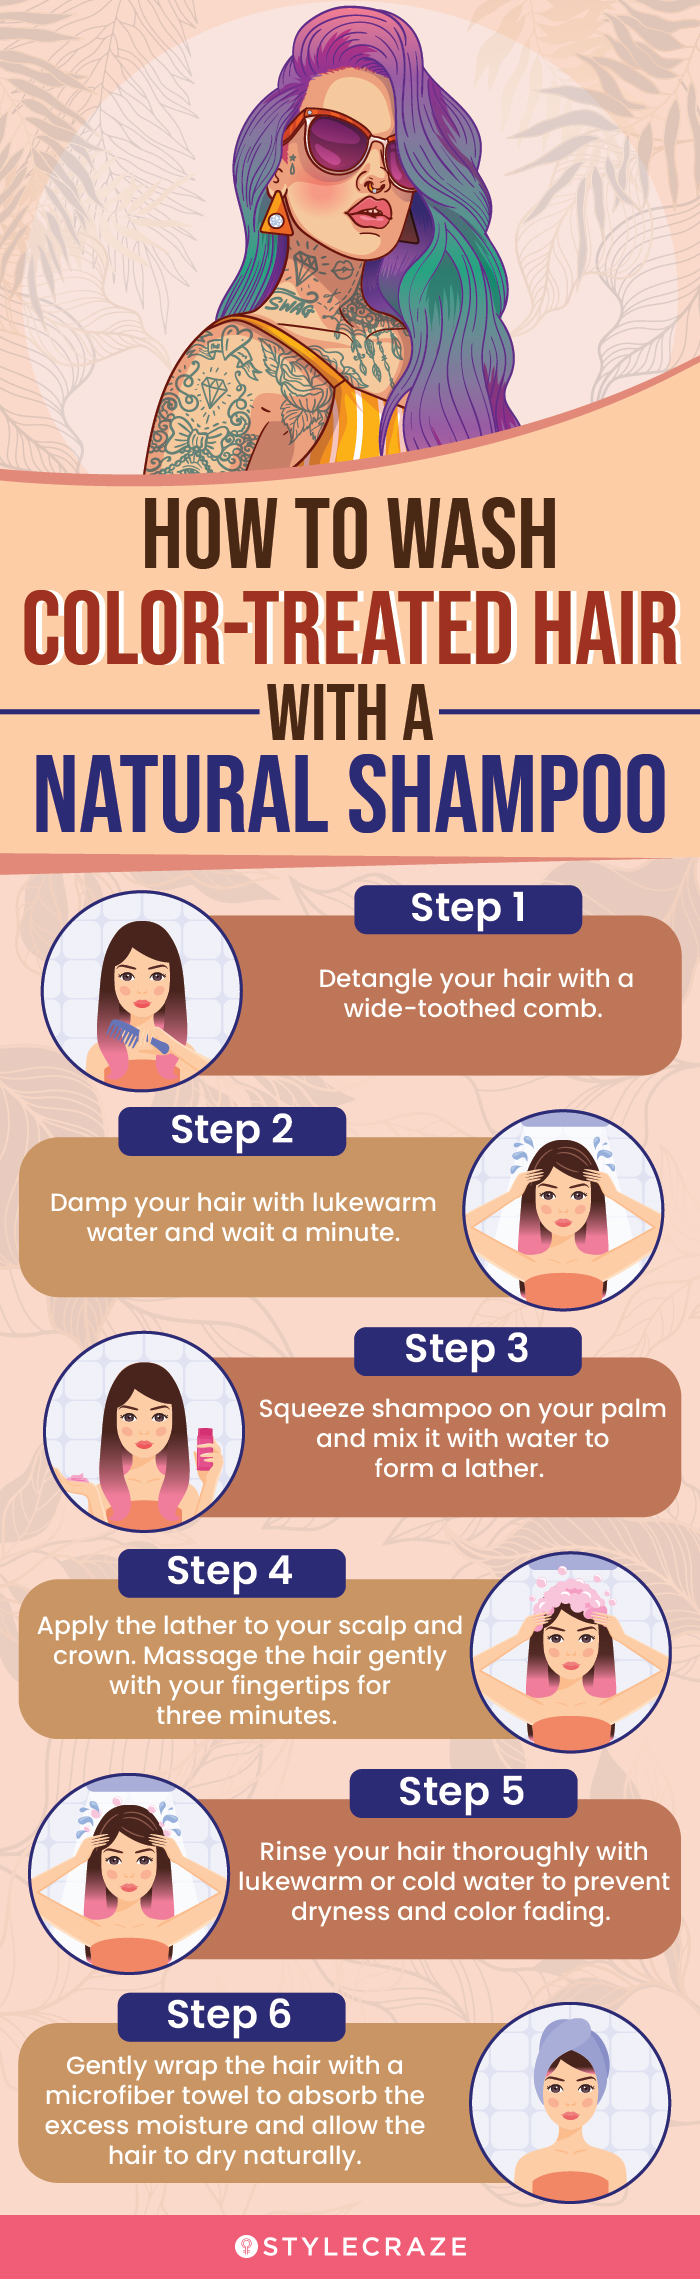 How To Wash Color-Treated Hair With A Natural Shampoo [infographic]